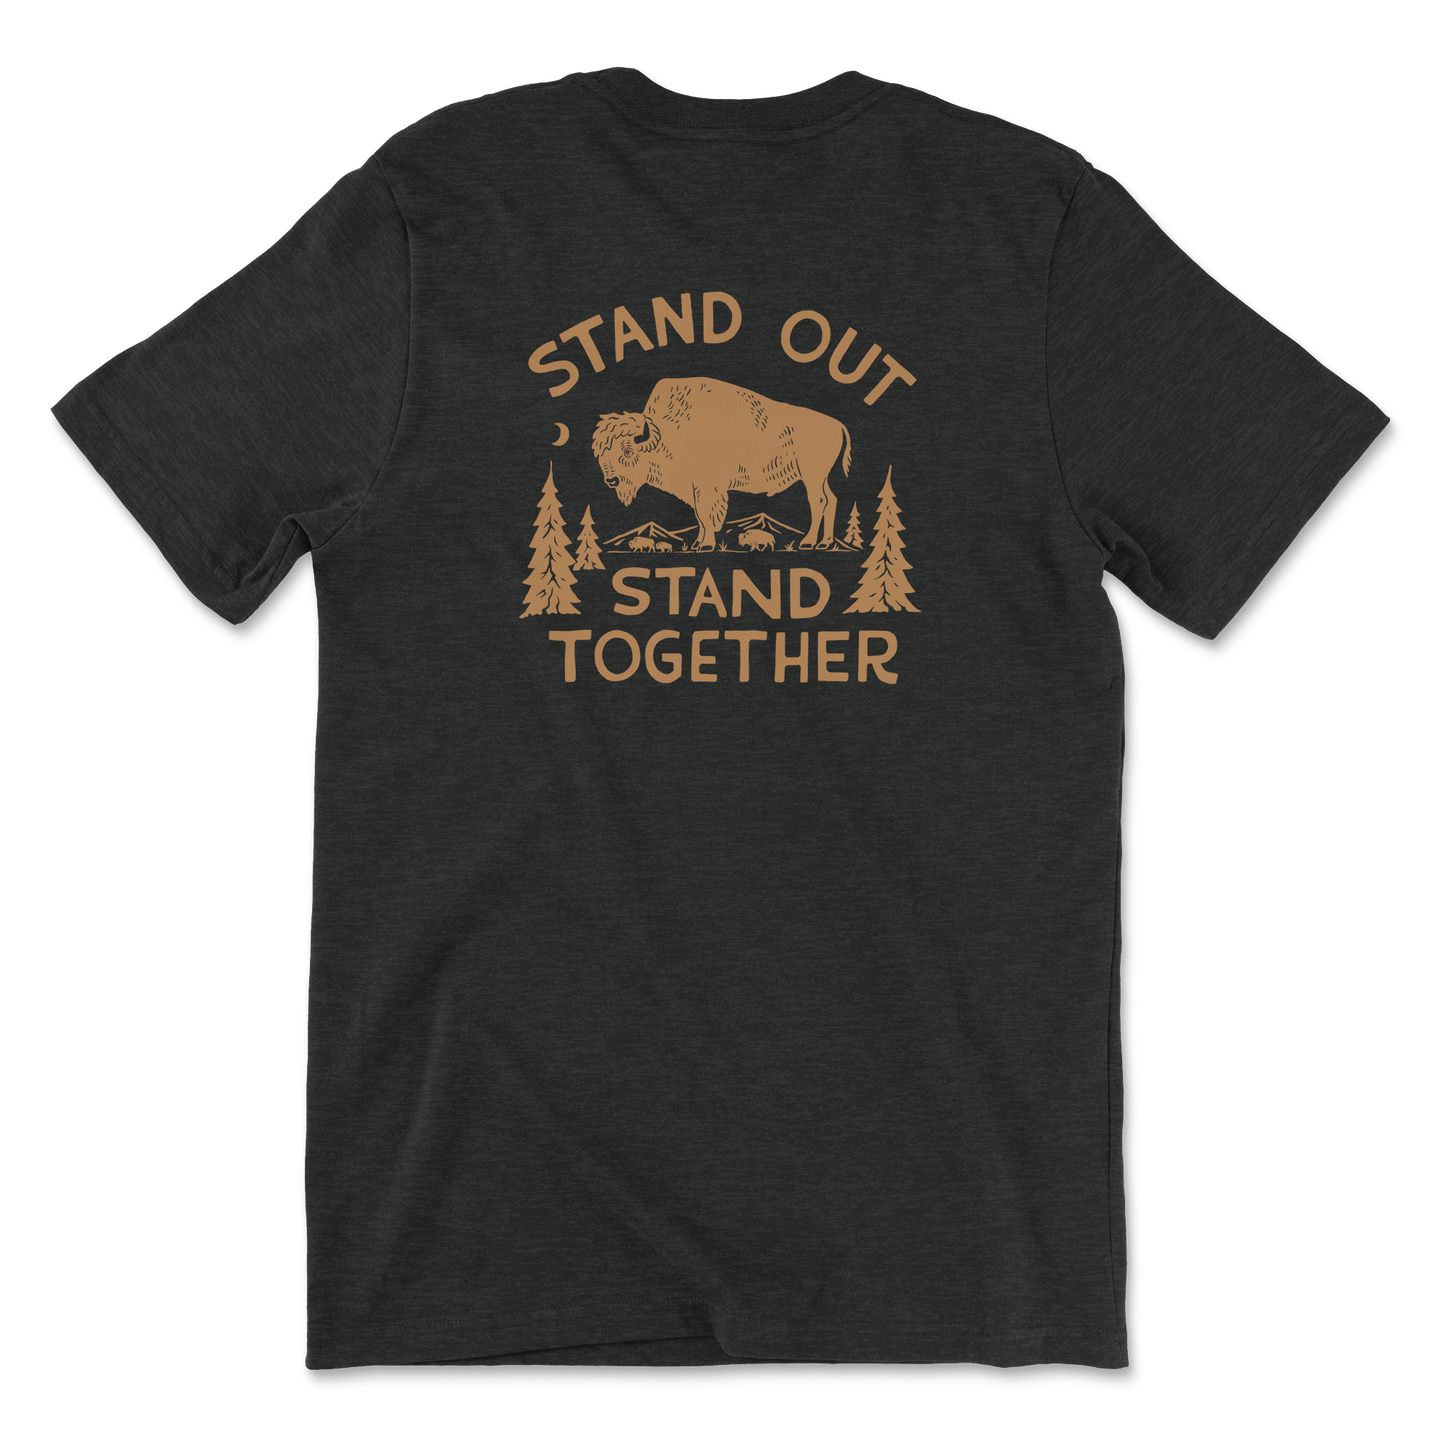 "Stand Out & Stand Together" Black Tee